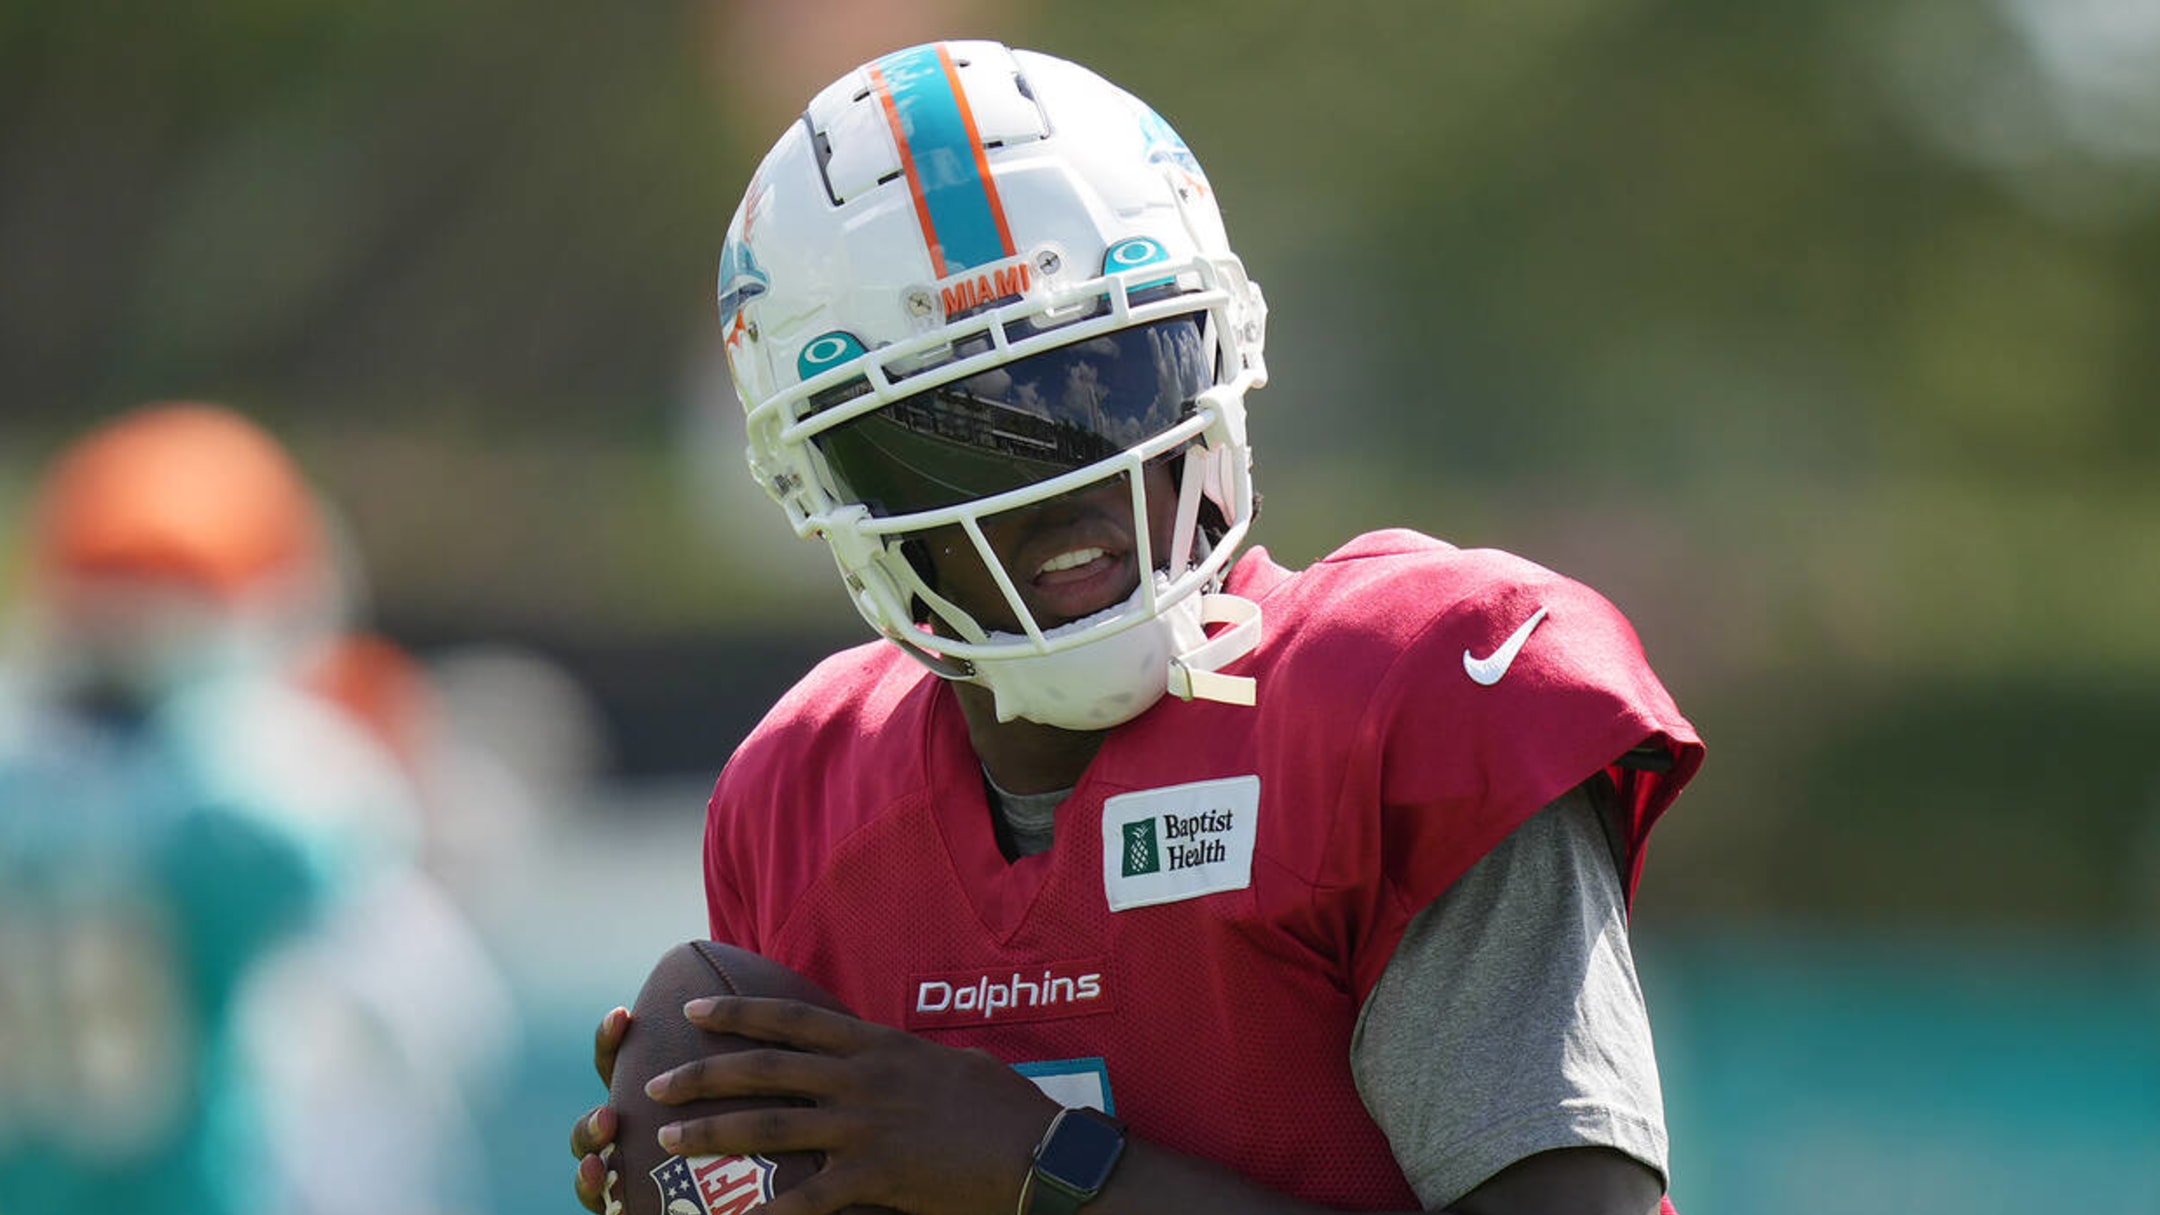 Dolphins back-up QB Teddy Bridgewater to start after Tua was hurt